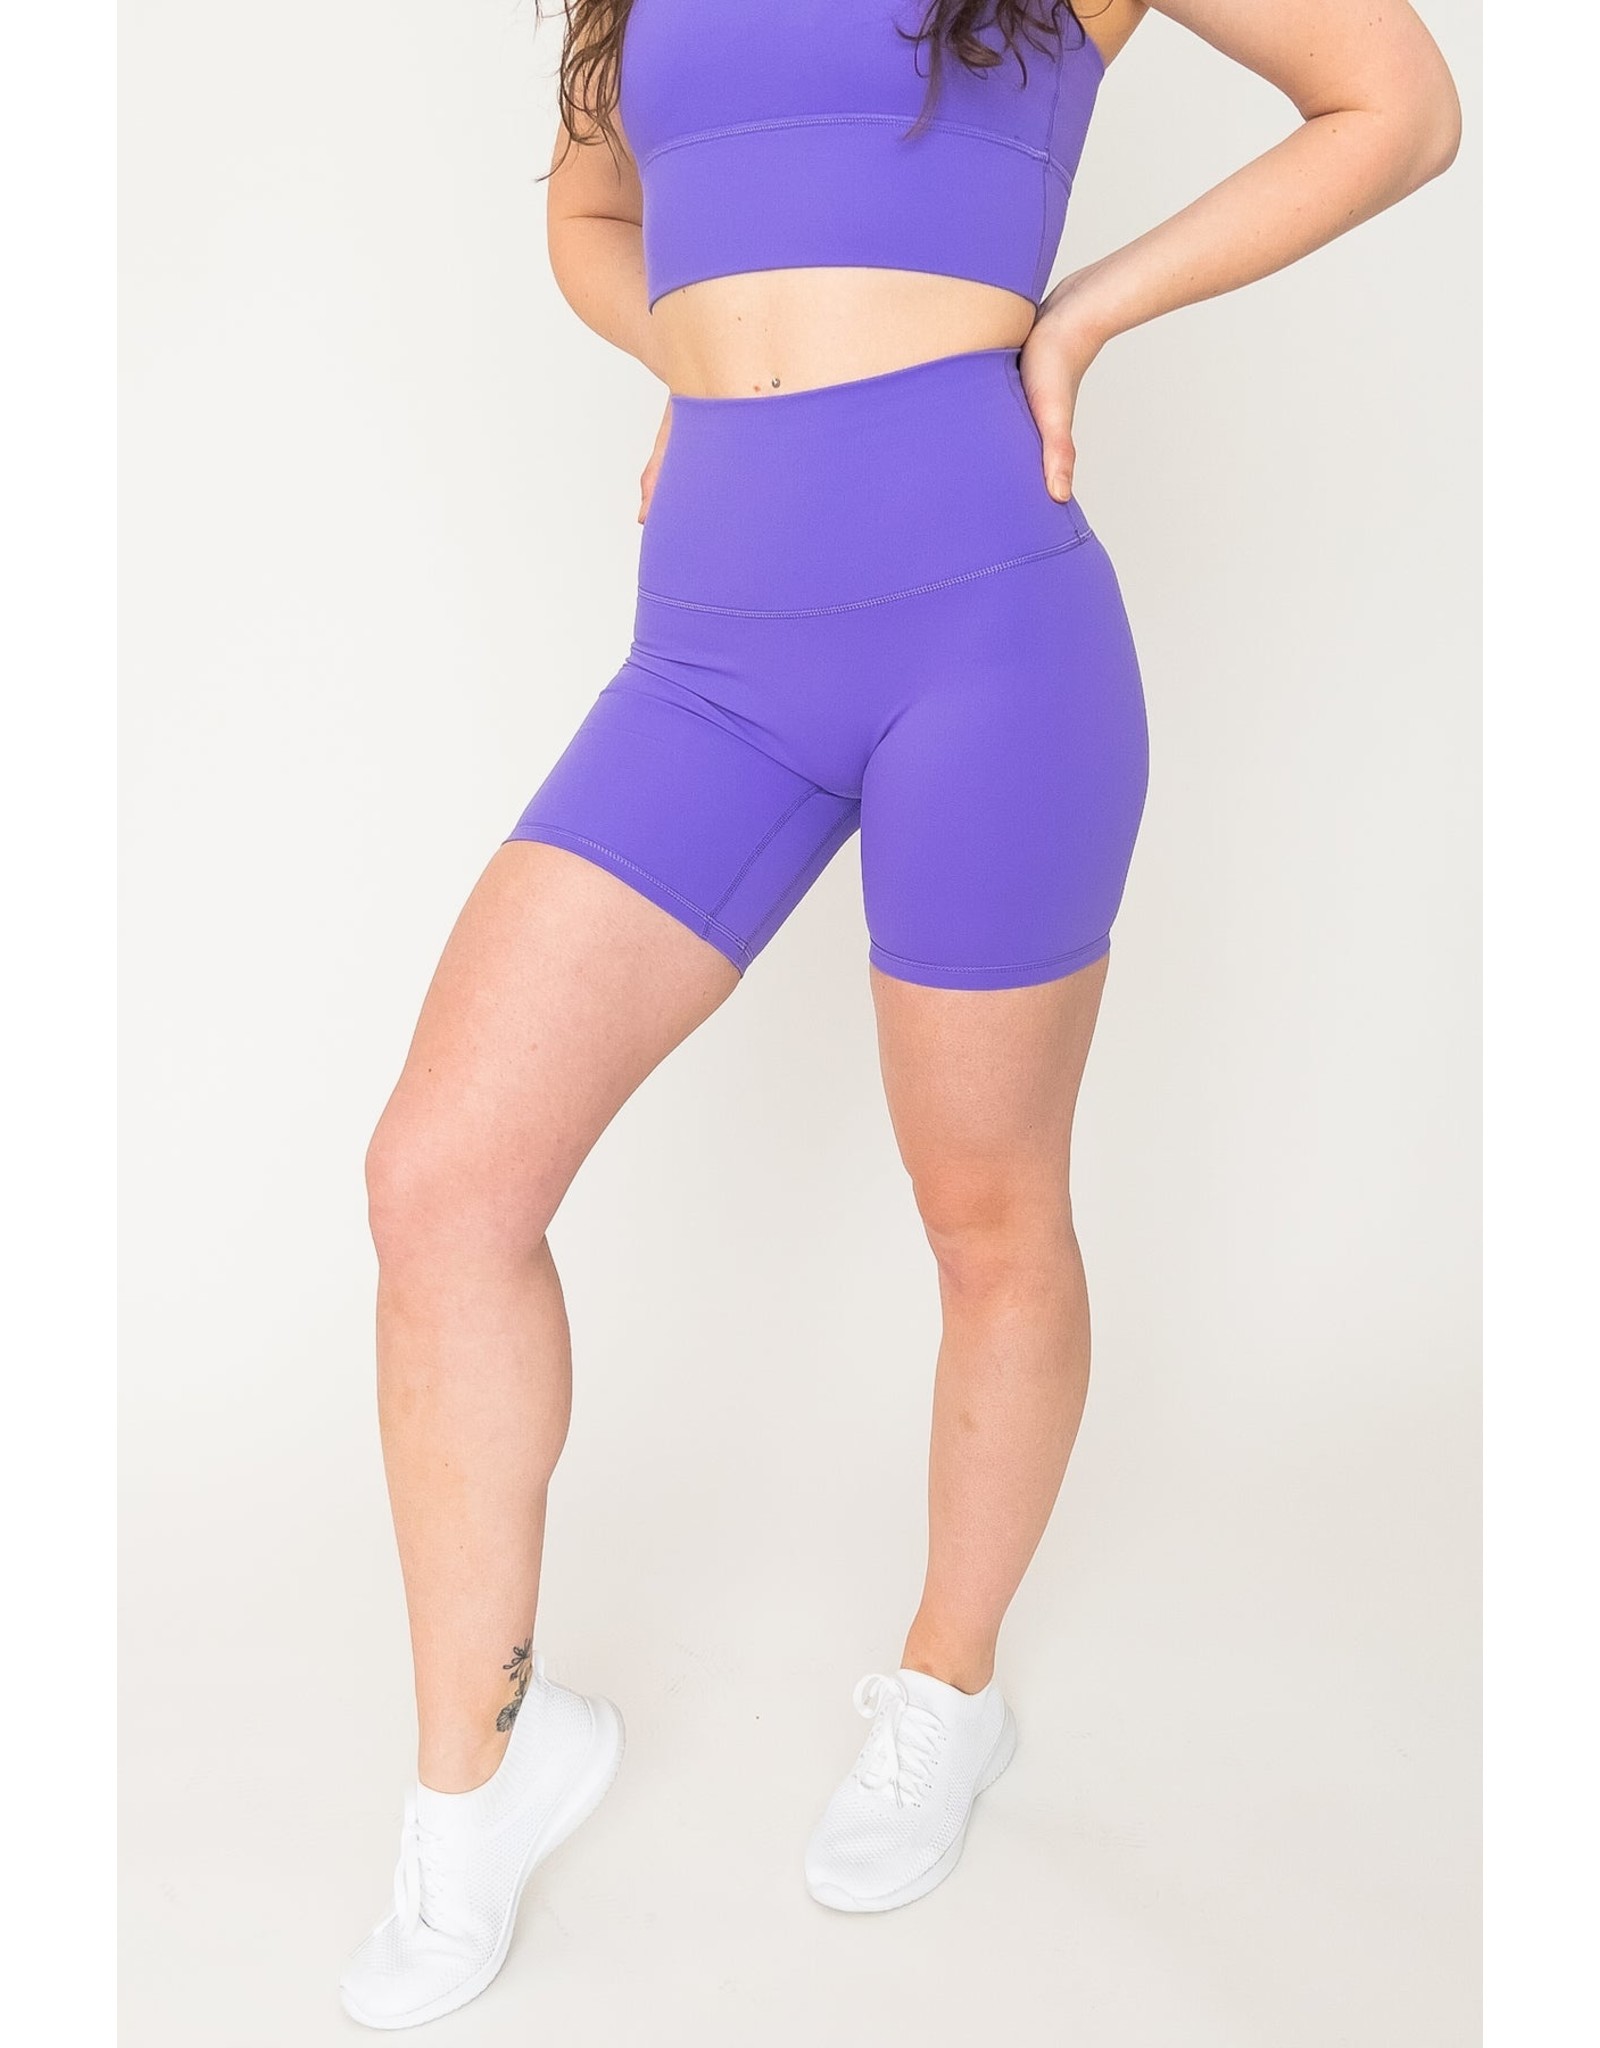 BARE ACTIVEWEAR SIMPLY FLAWLESS SHORTS 2.0